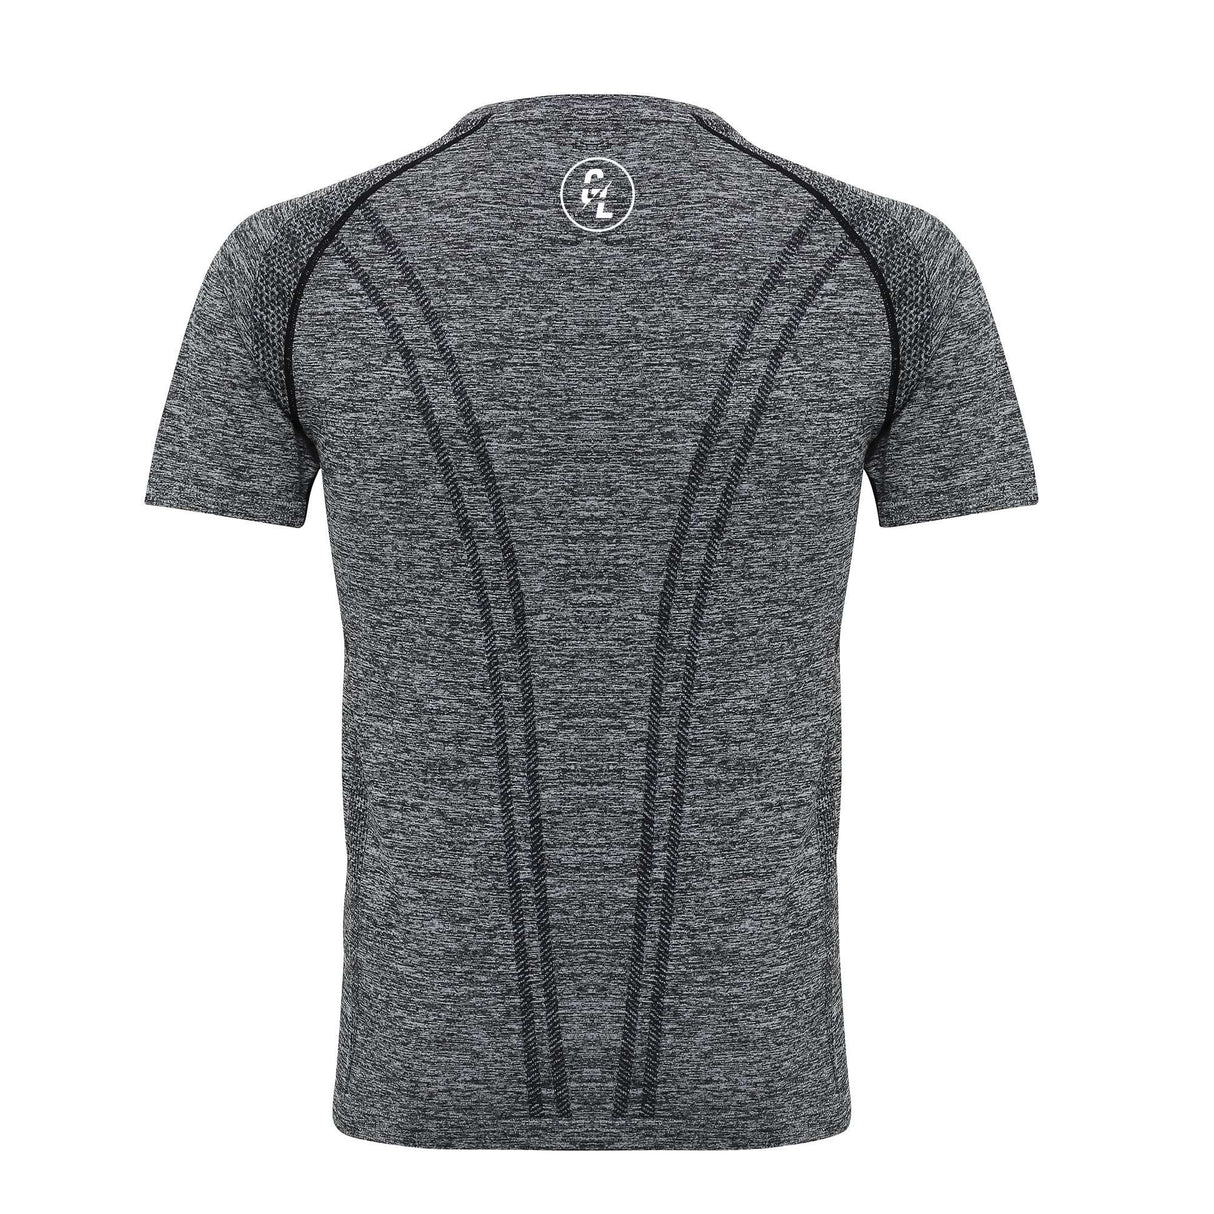 Gainline Rugby Seamless T-Shirt - Charcoal |T-Shirt | Gainline | Absolute Rugby